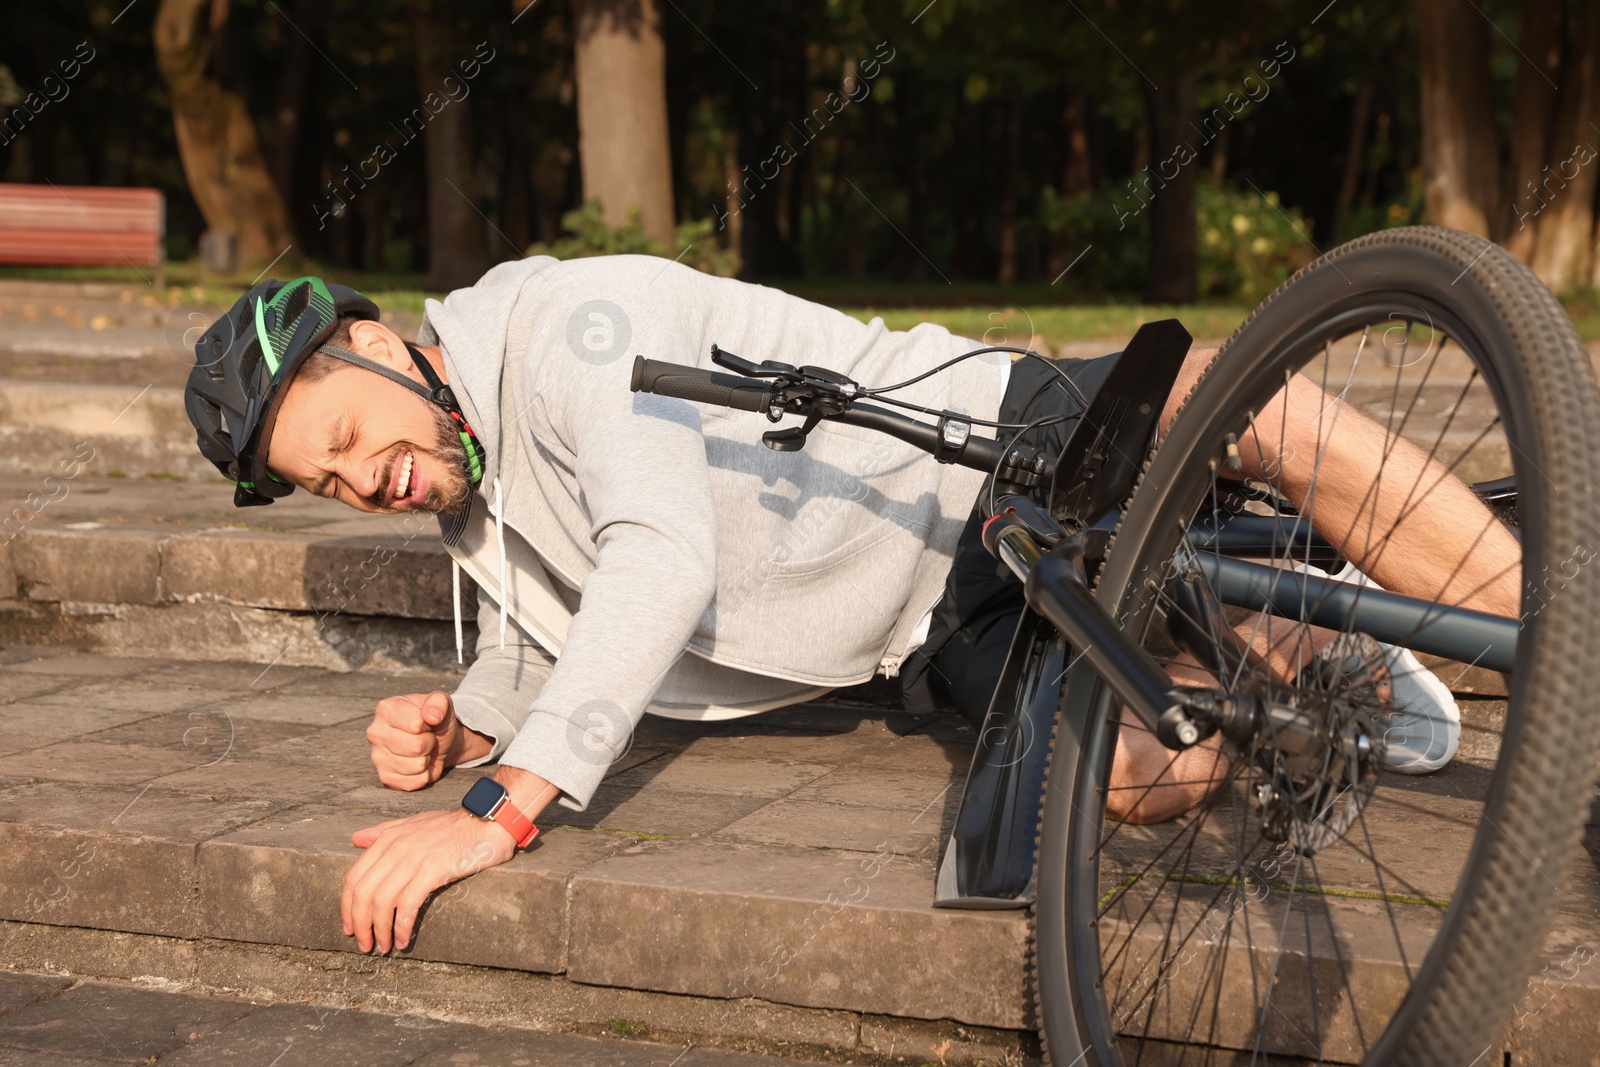 Photo of Man fallen off his bicycle on steps outdoors